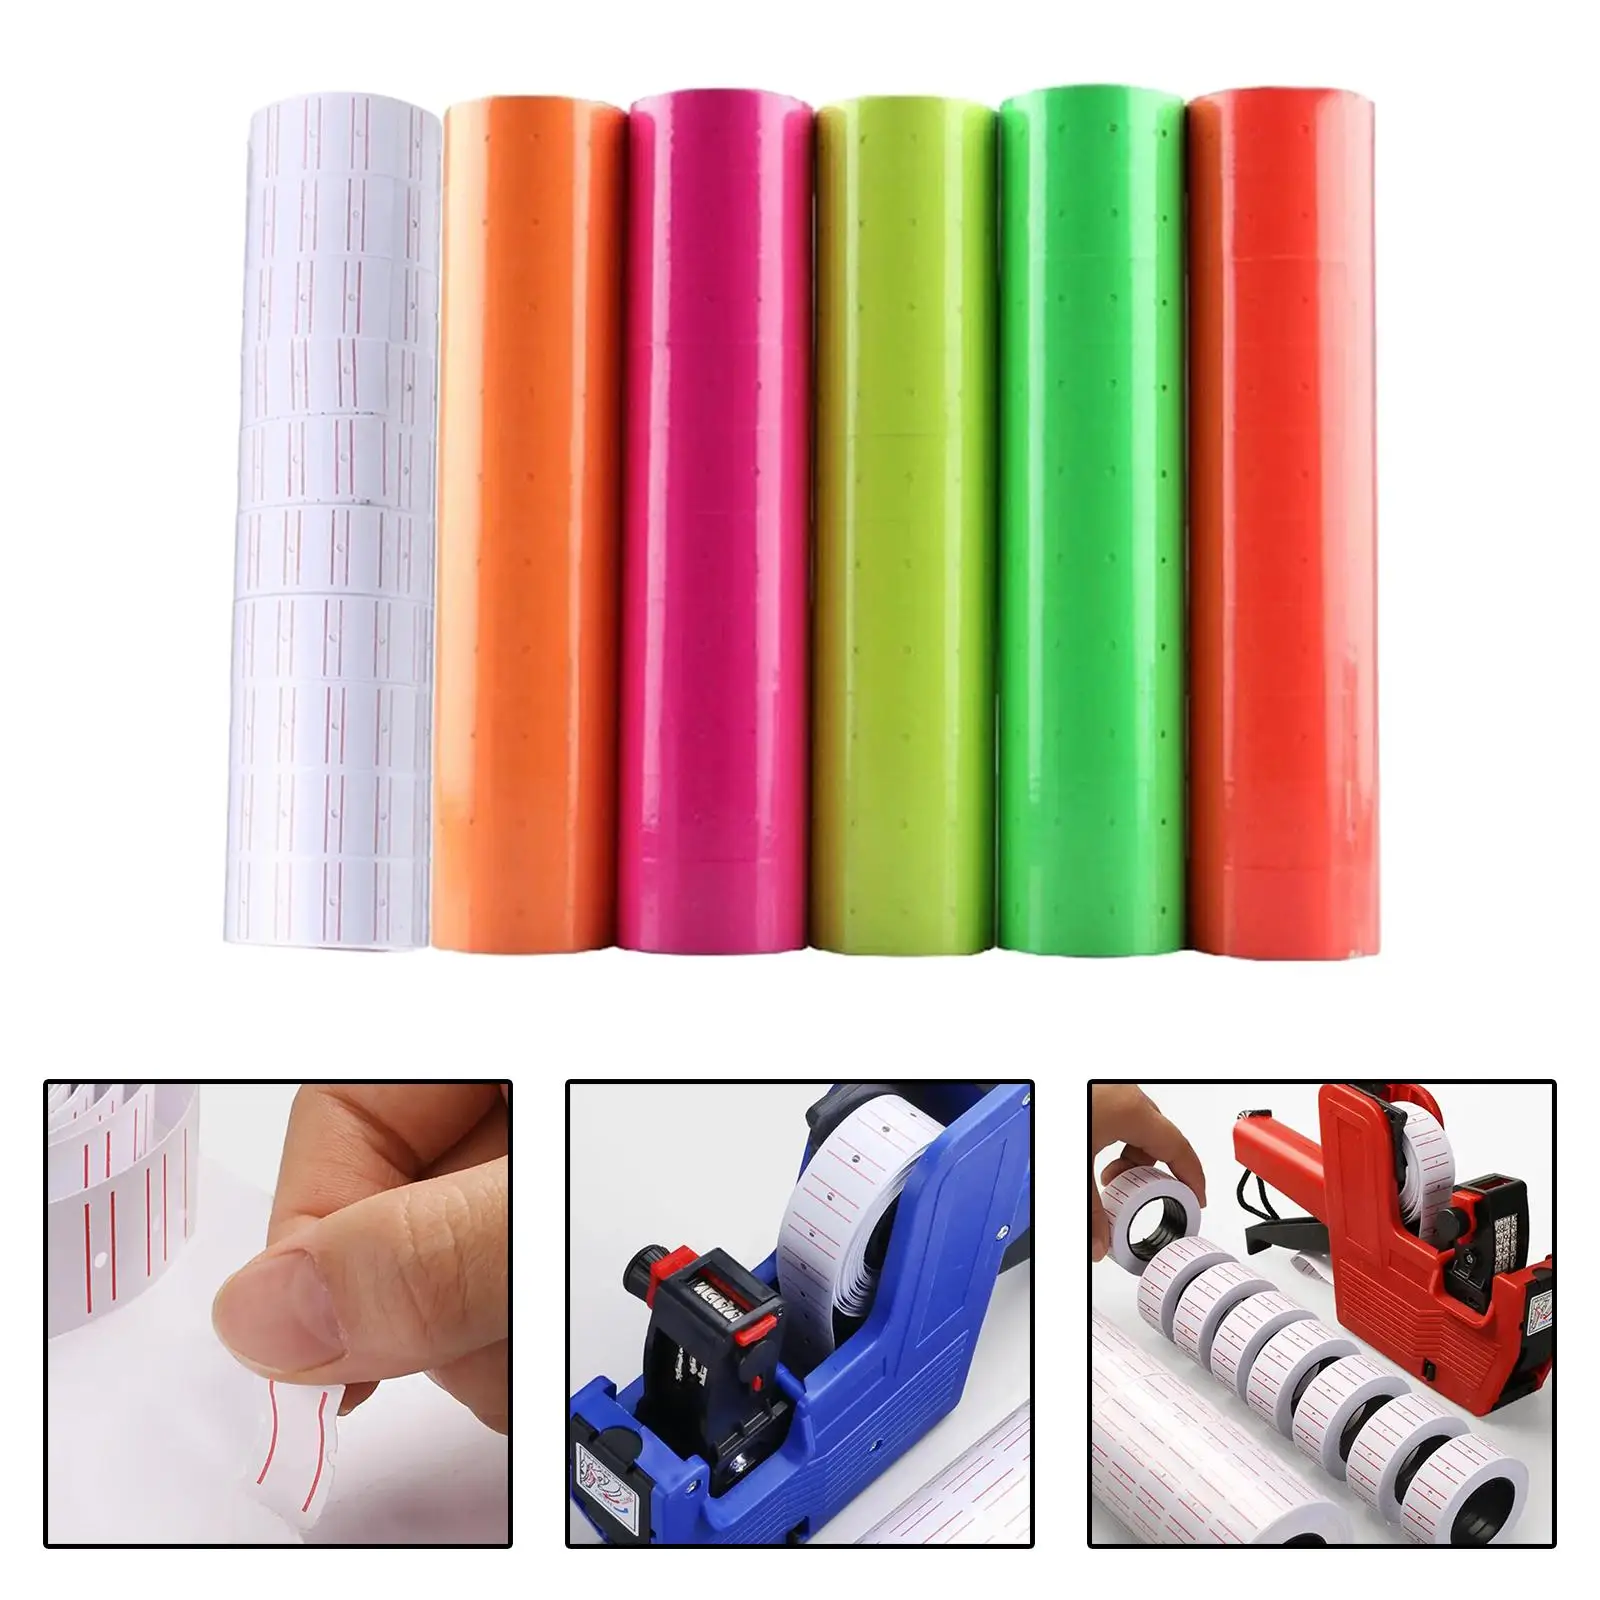 60Pcs Label Price Paper Labeling Tagging Supplies Marking Prices Tags Rolls Pricemarker for Stores Use Retail Shop Supermarkets